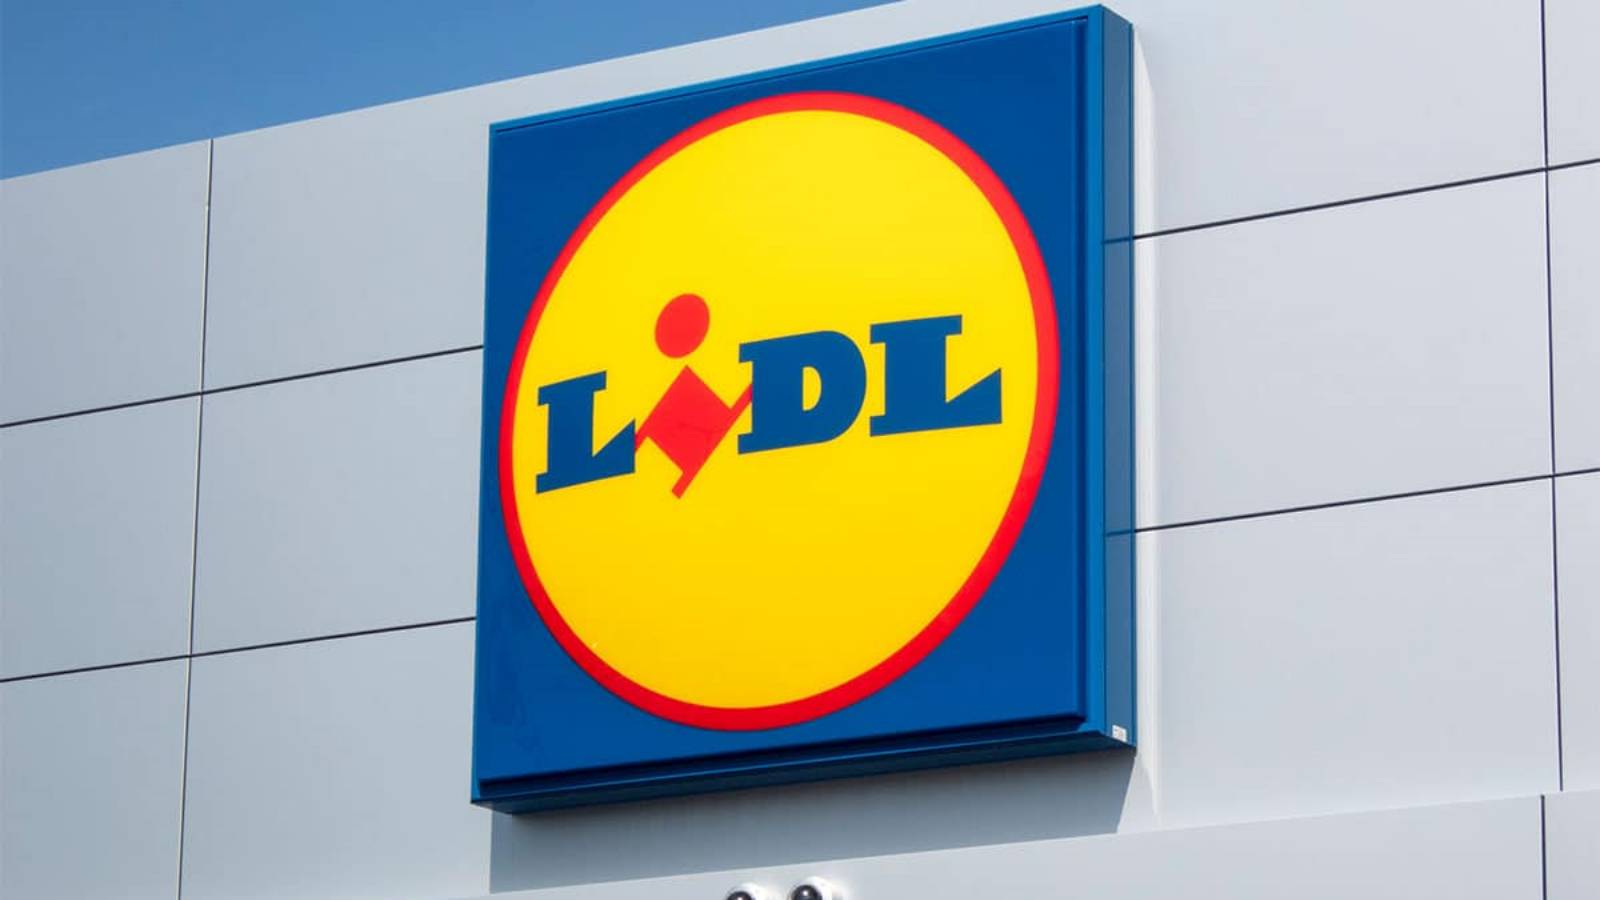 Barbecue LIDL Roumanie